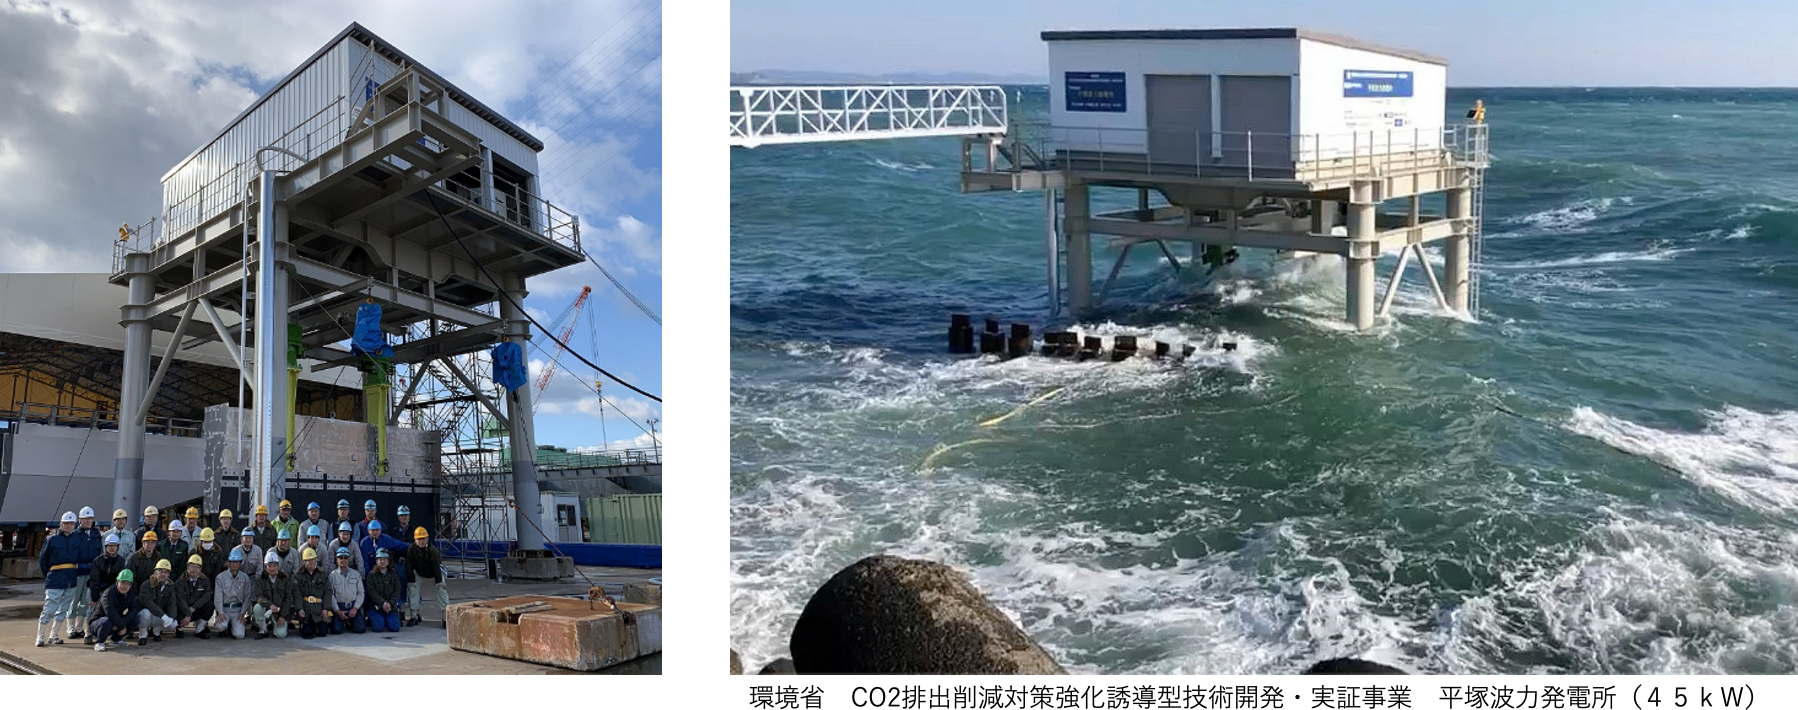 Achievements in the development of wave power generation systems that produce clean energy